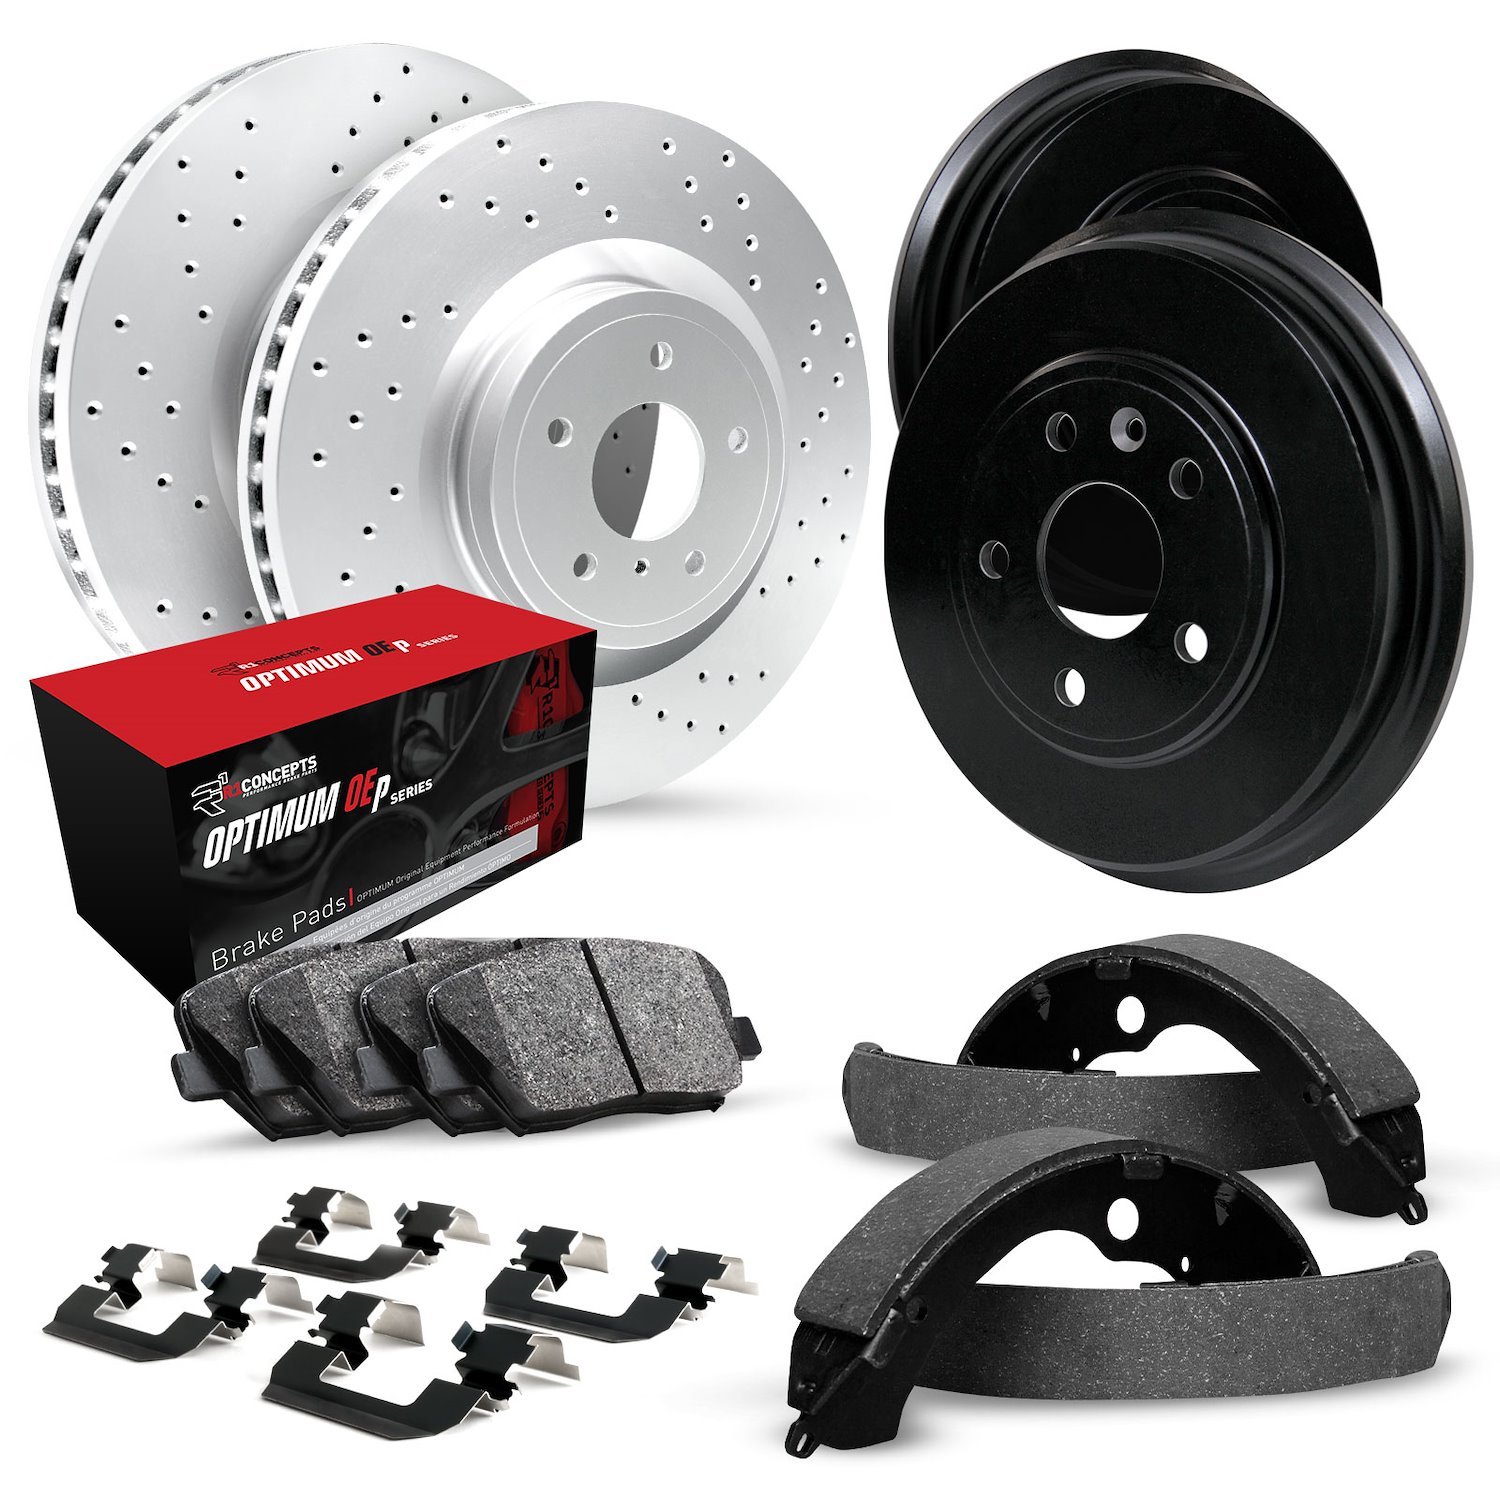 GEO-Carbon Drilled Brake Rotor & Drum Set w/Optimum OE Pads, Shoes, & Hardware, 2004-2008 GM, Position: Front & Rear